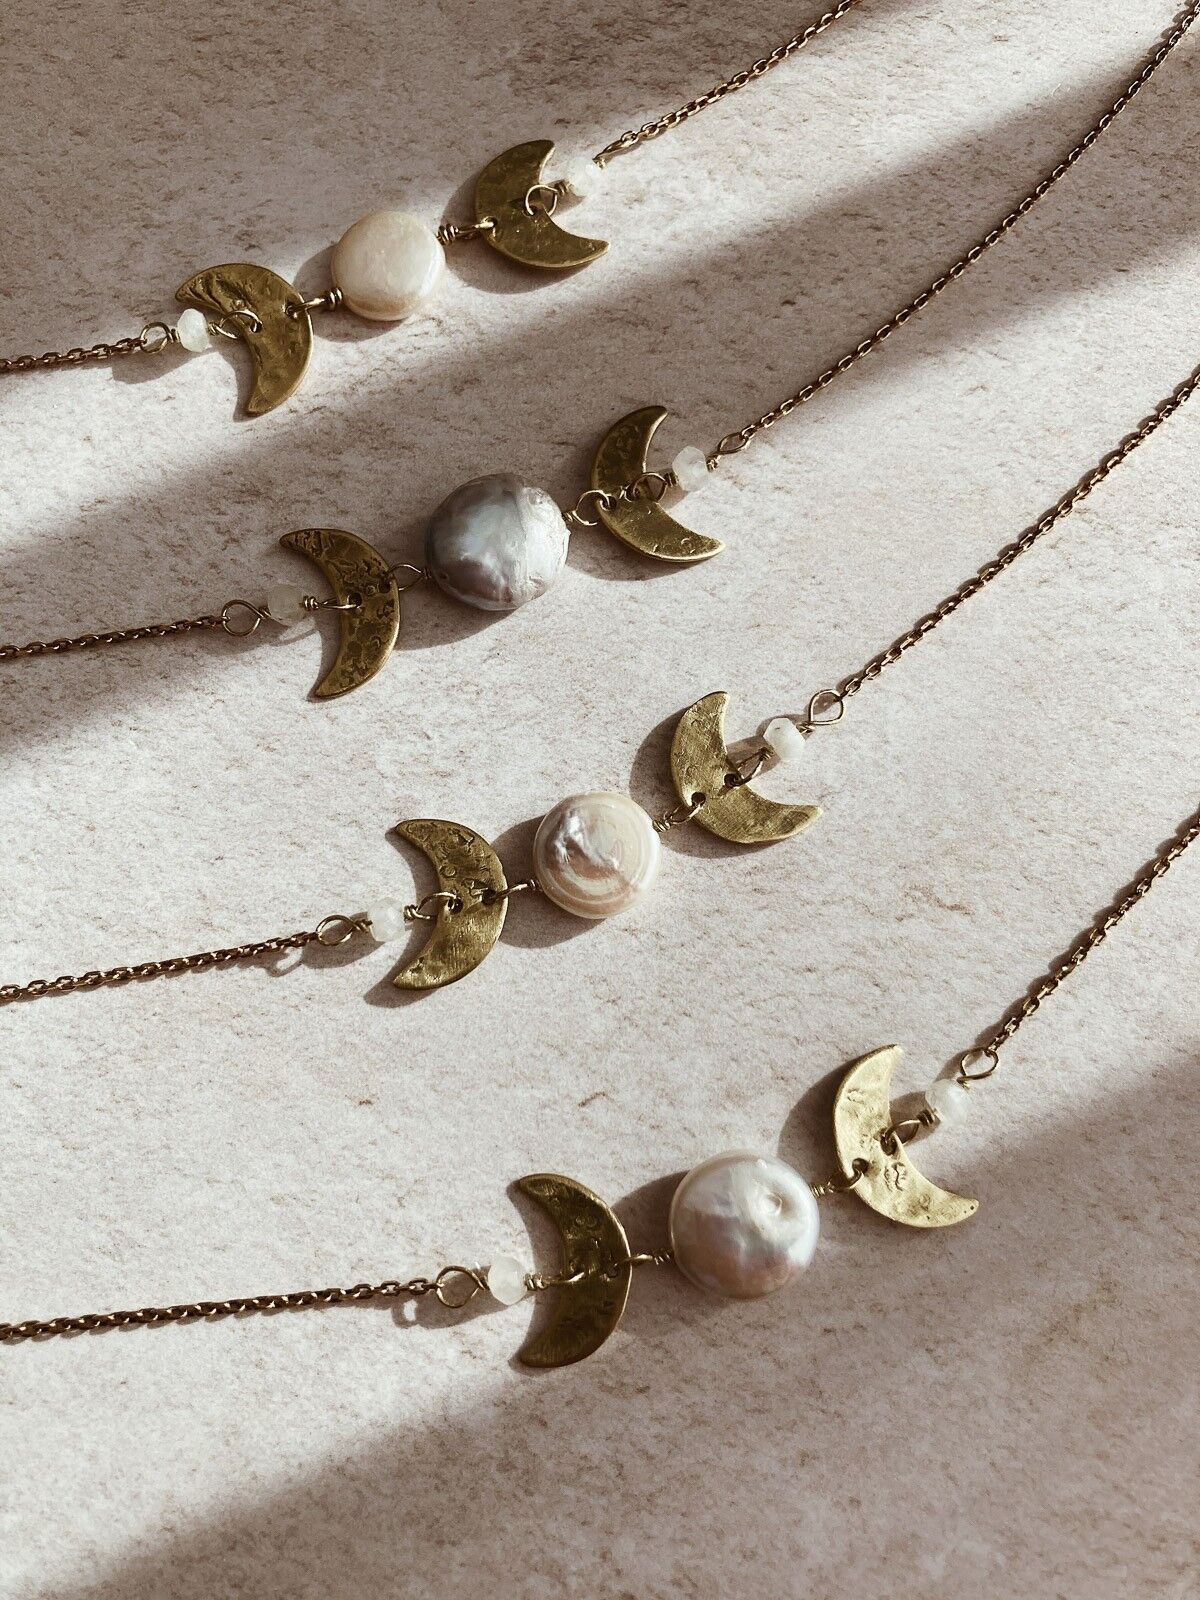 Buy wholesale Moon Beam necklace, moon phases necklace, brass +